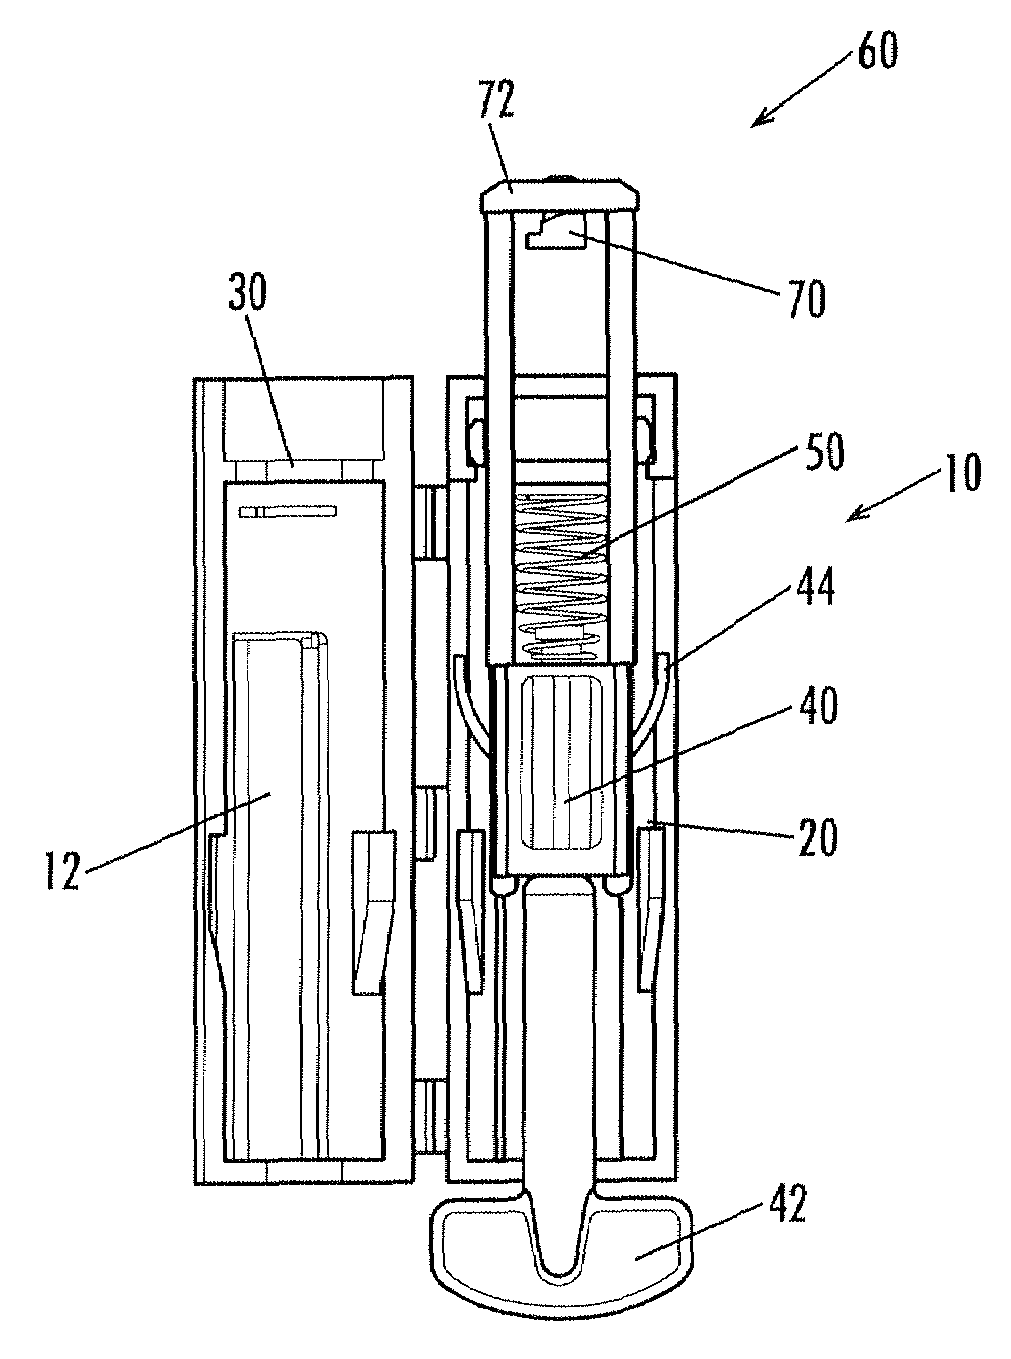 Single use device for blood microsampling